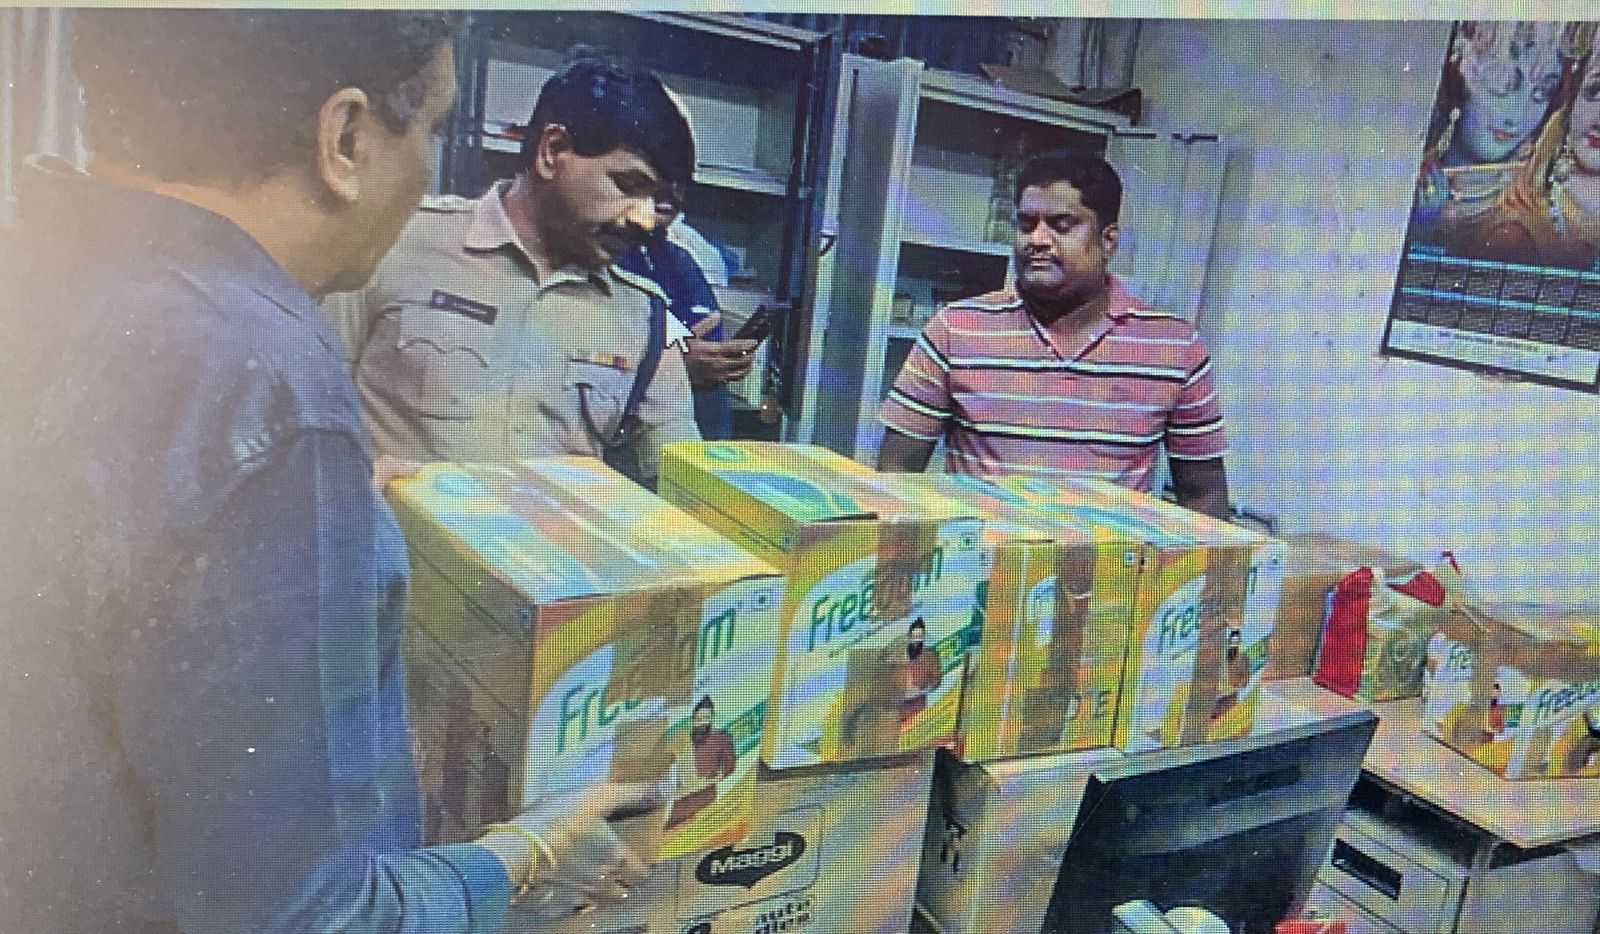 Cops seize Rs. 6.67 crore from hotel related to BRS ex-MP in Karimnagar